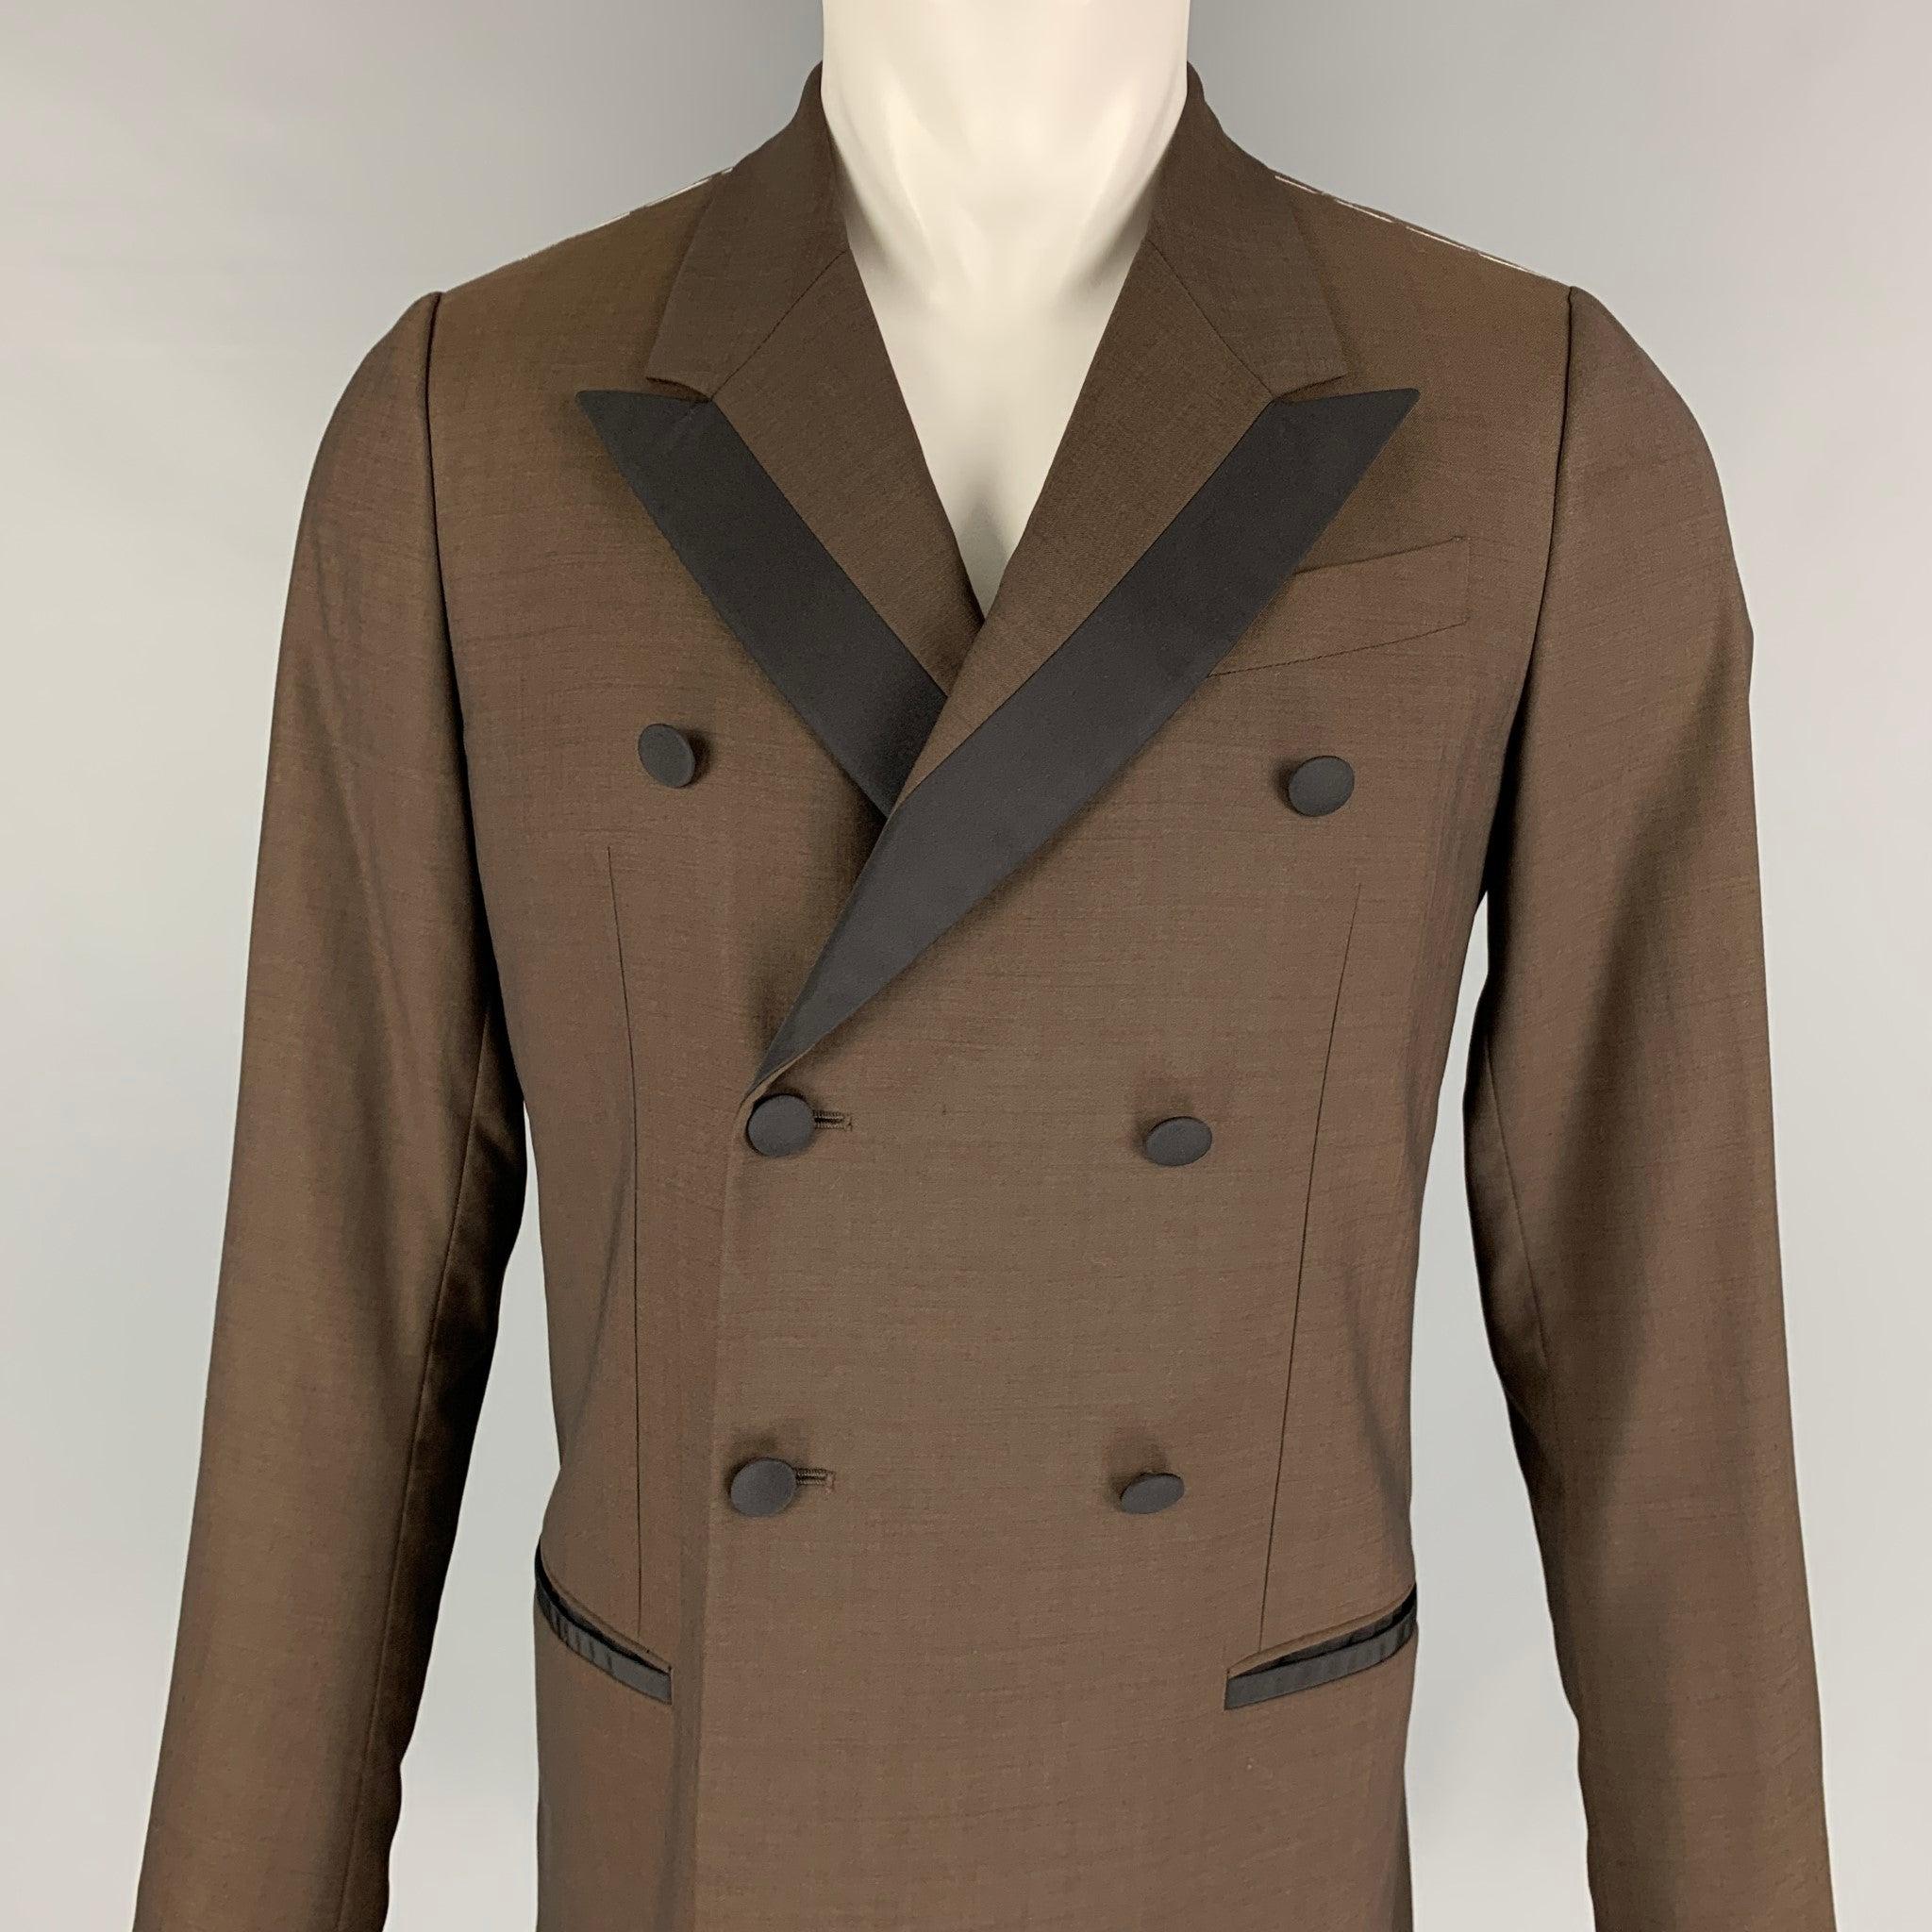 DOLCE & GABBANA coat comes in a brown & black wool blend with a full liner featuring a peak lapel, slit pockets, single back vent, and a double breasted closure. Made in Italy.
Excellent
Pre-Owned Condition. 

Marked:   44 

Measurements: 
